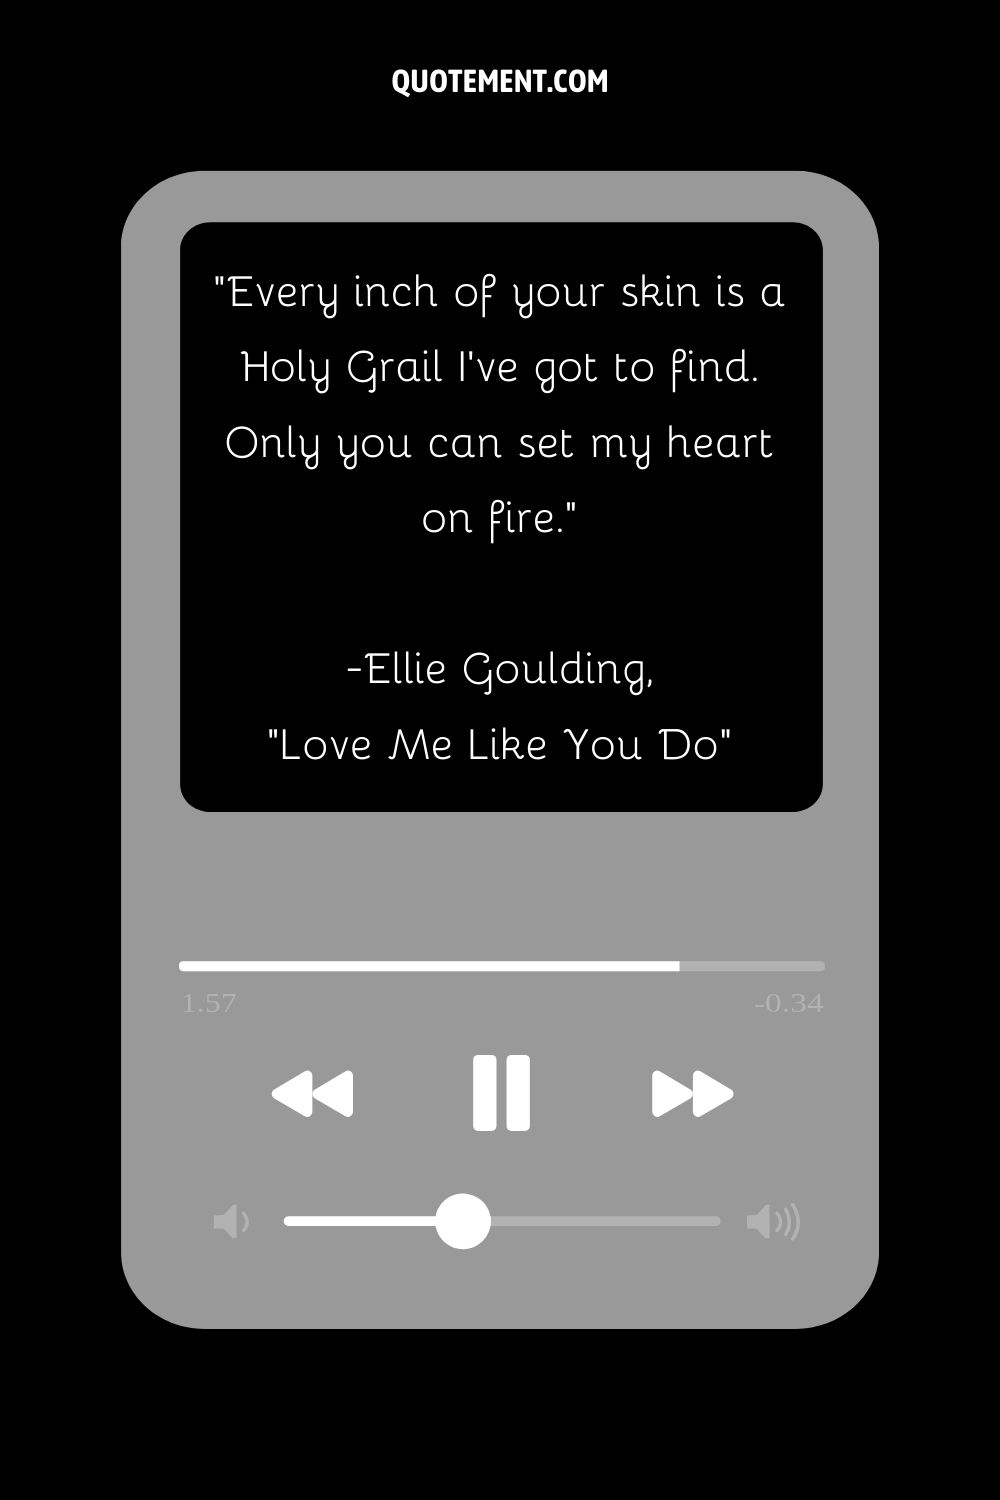 “Every inch of your skin is a Holy Grail I’ve got to find. Only you can set my heart on fire.” — Ellie Goulding, “Love Me Like You Do”